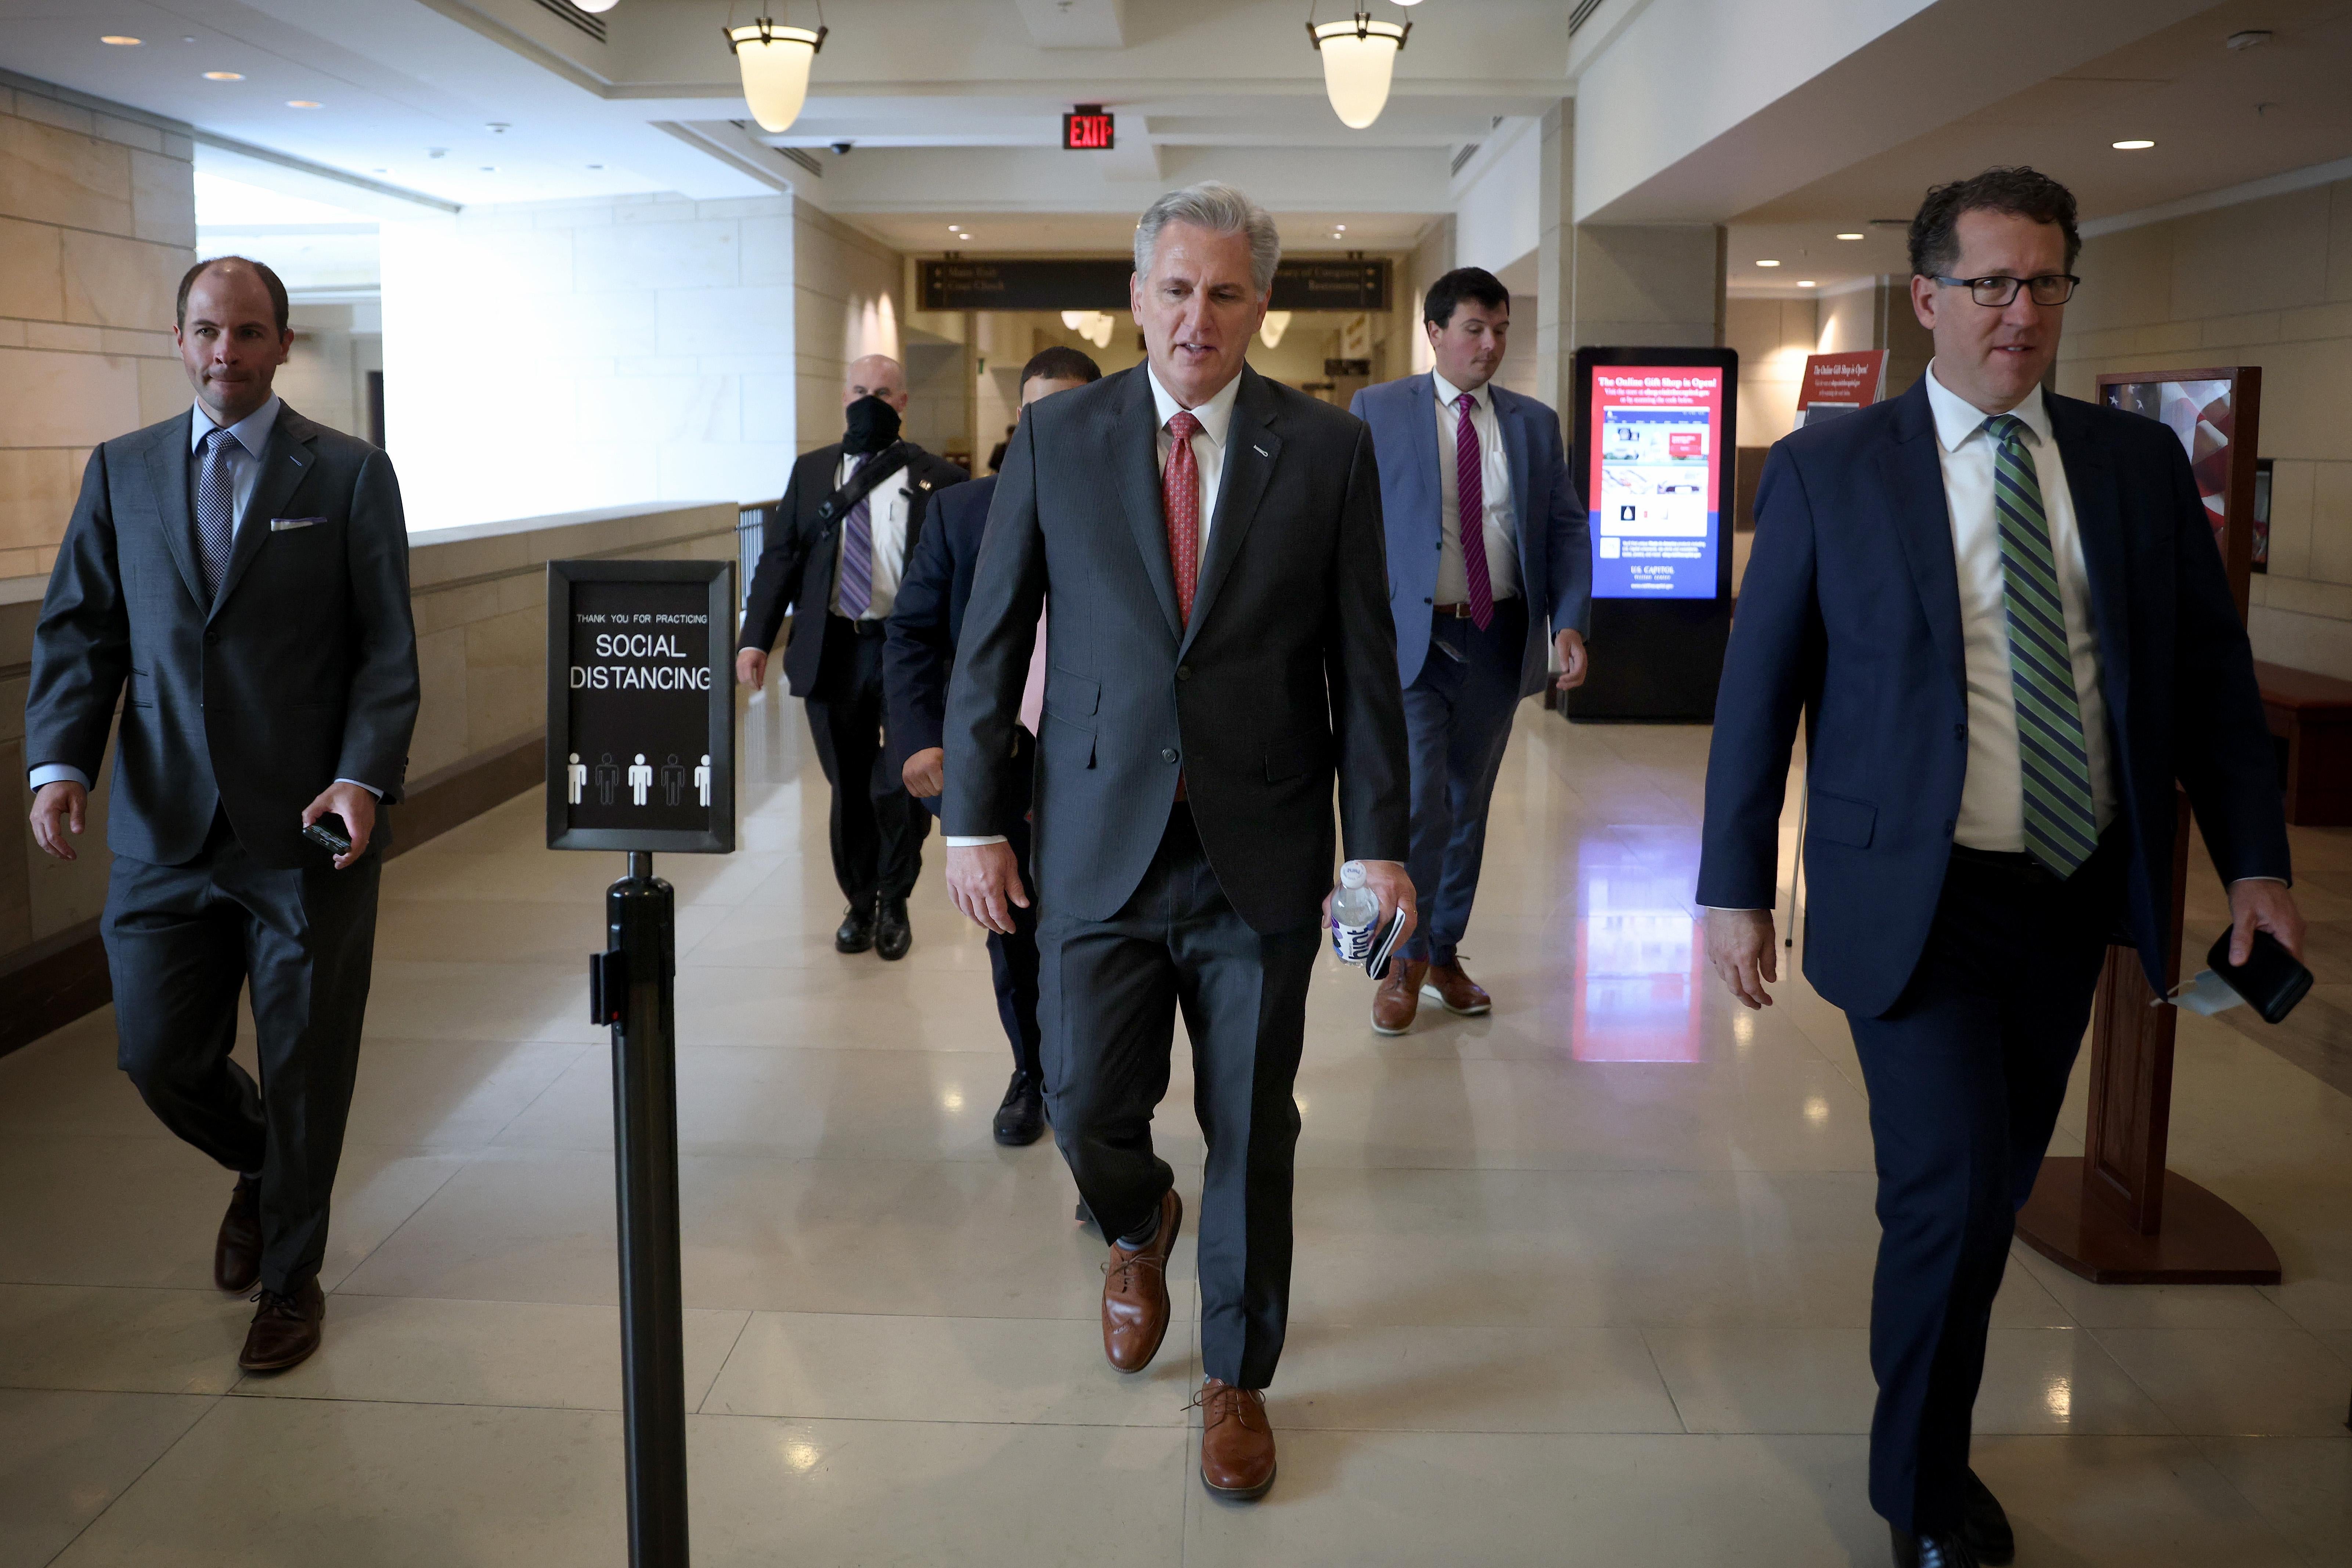 Kevin McCarthy leaves a meeting of the House Republican Conference, walking down a hallway with several men in suits around him